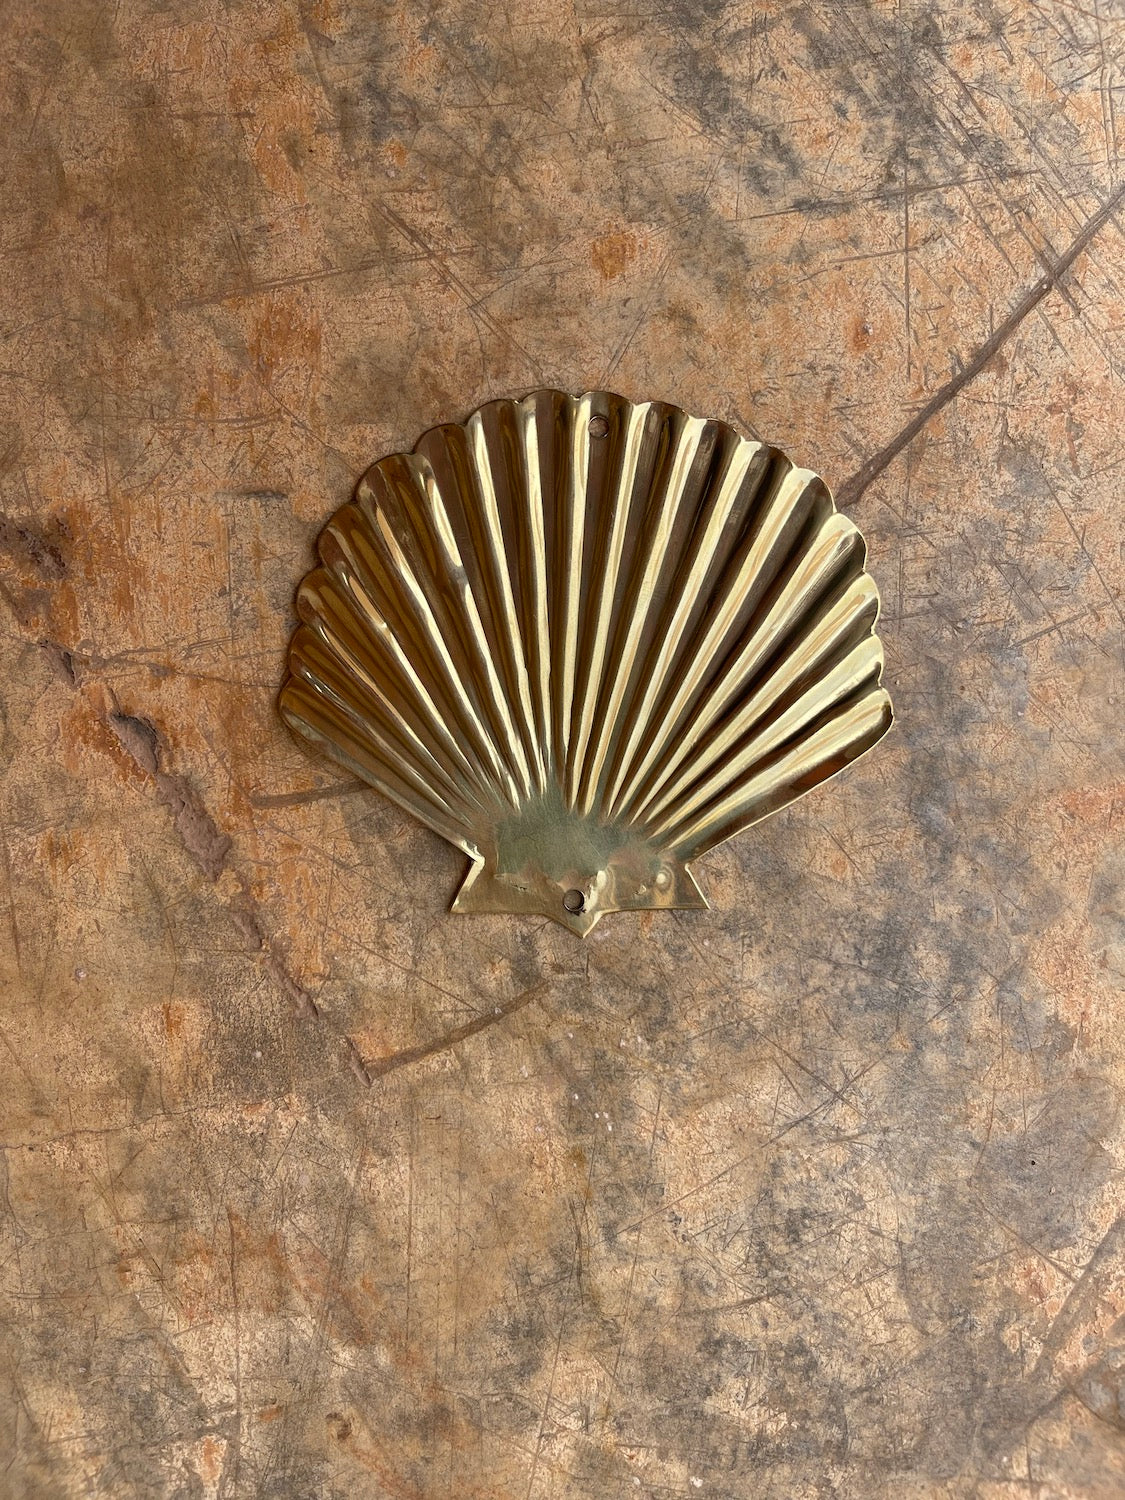 Moroccan Brass Wall Decor Shell Metal Wall Ornament Decor Une Vie Nomade Brand_Une Vie Nomade Home_Decor New Arrivals IMG_1853MoroccanBrassMetalWallDecorShell